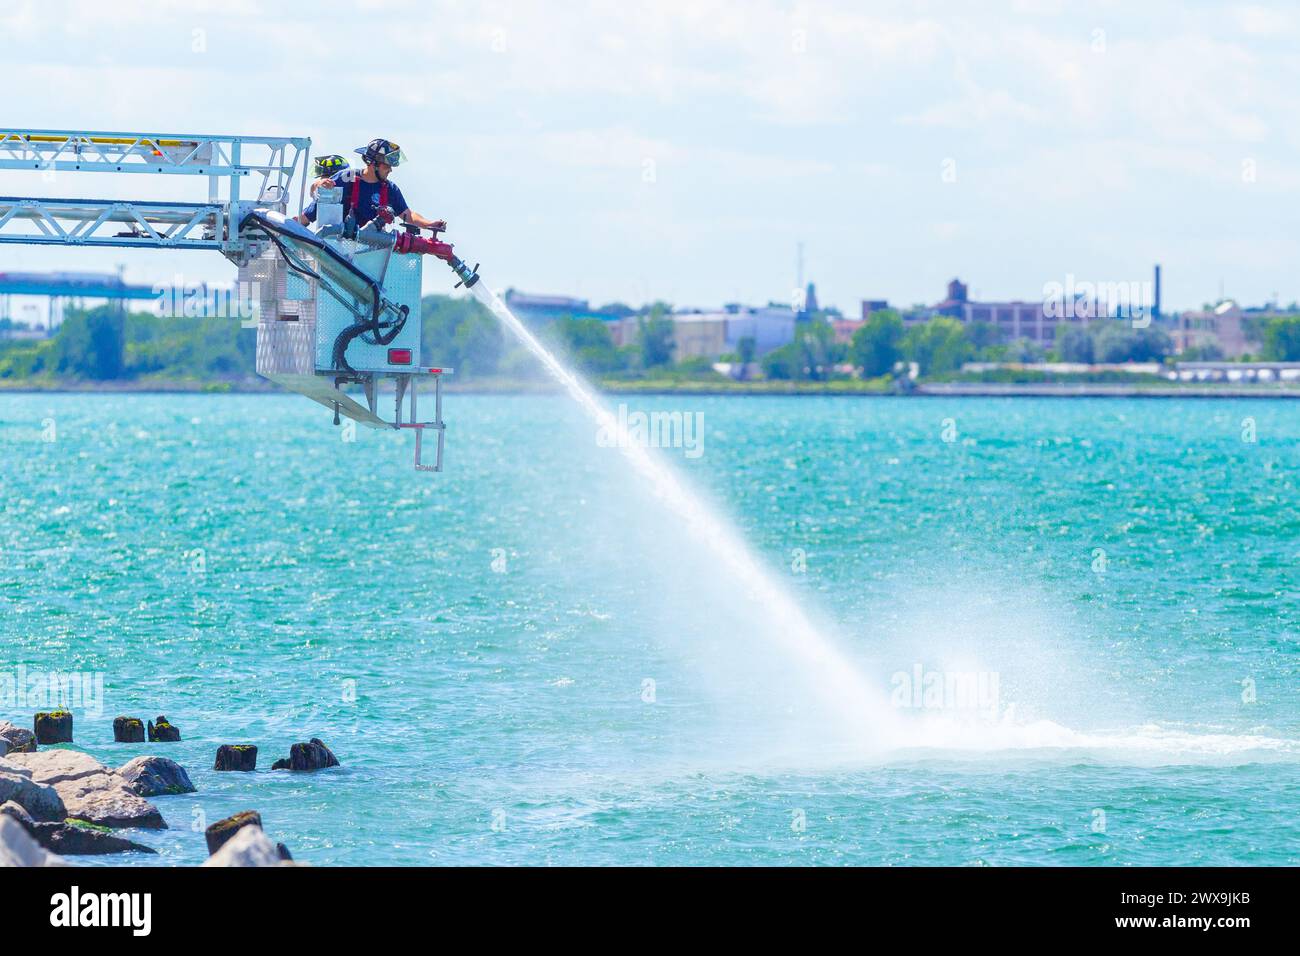 Windsor Fire and Rescue conduct fire training drills on the Detroit River, which separates the cities of Windsor, Ontario, Canada from Detroit, Michig Stock Photo